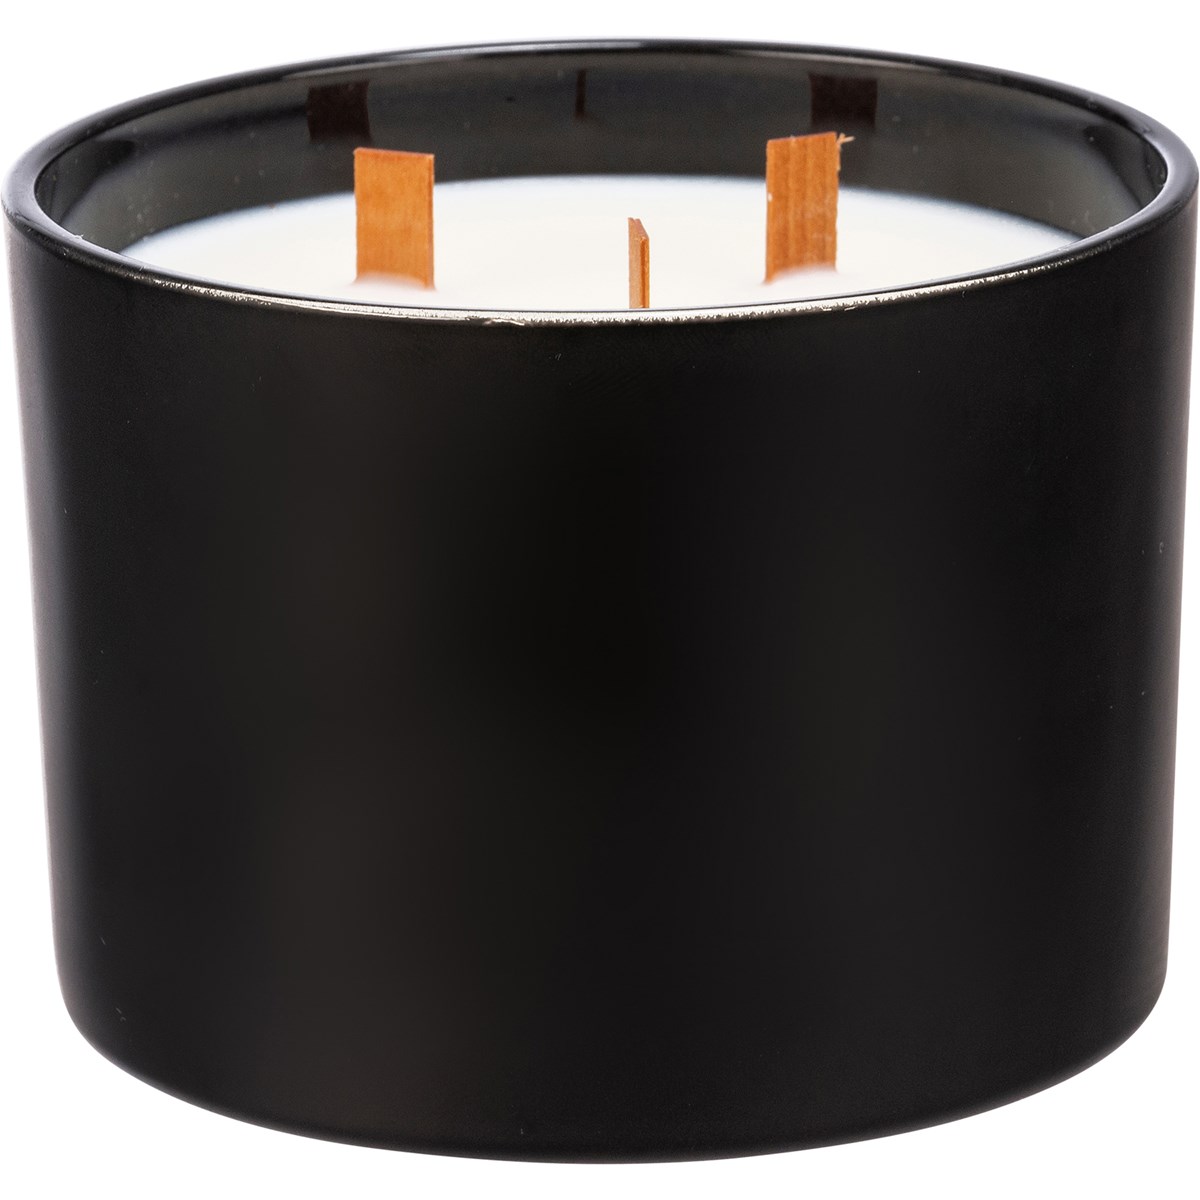 Family Jar Candle - Soy Wax, Glass, Wood